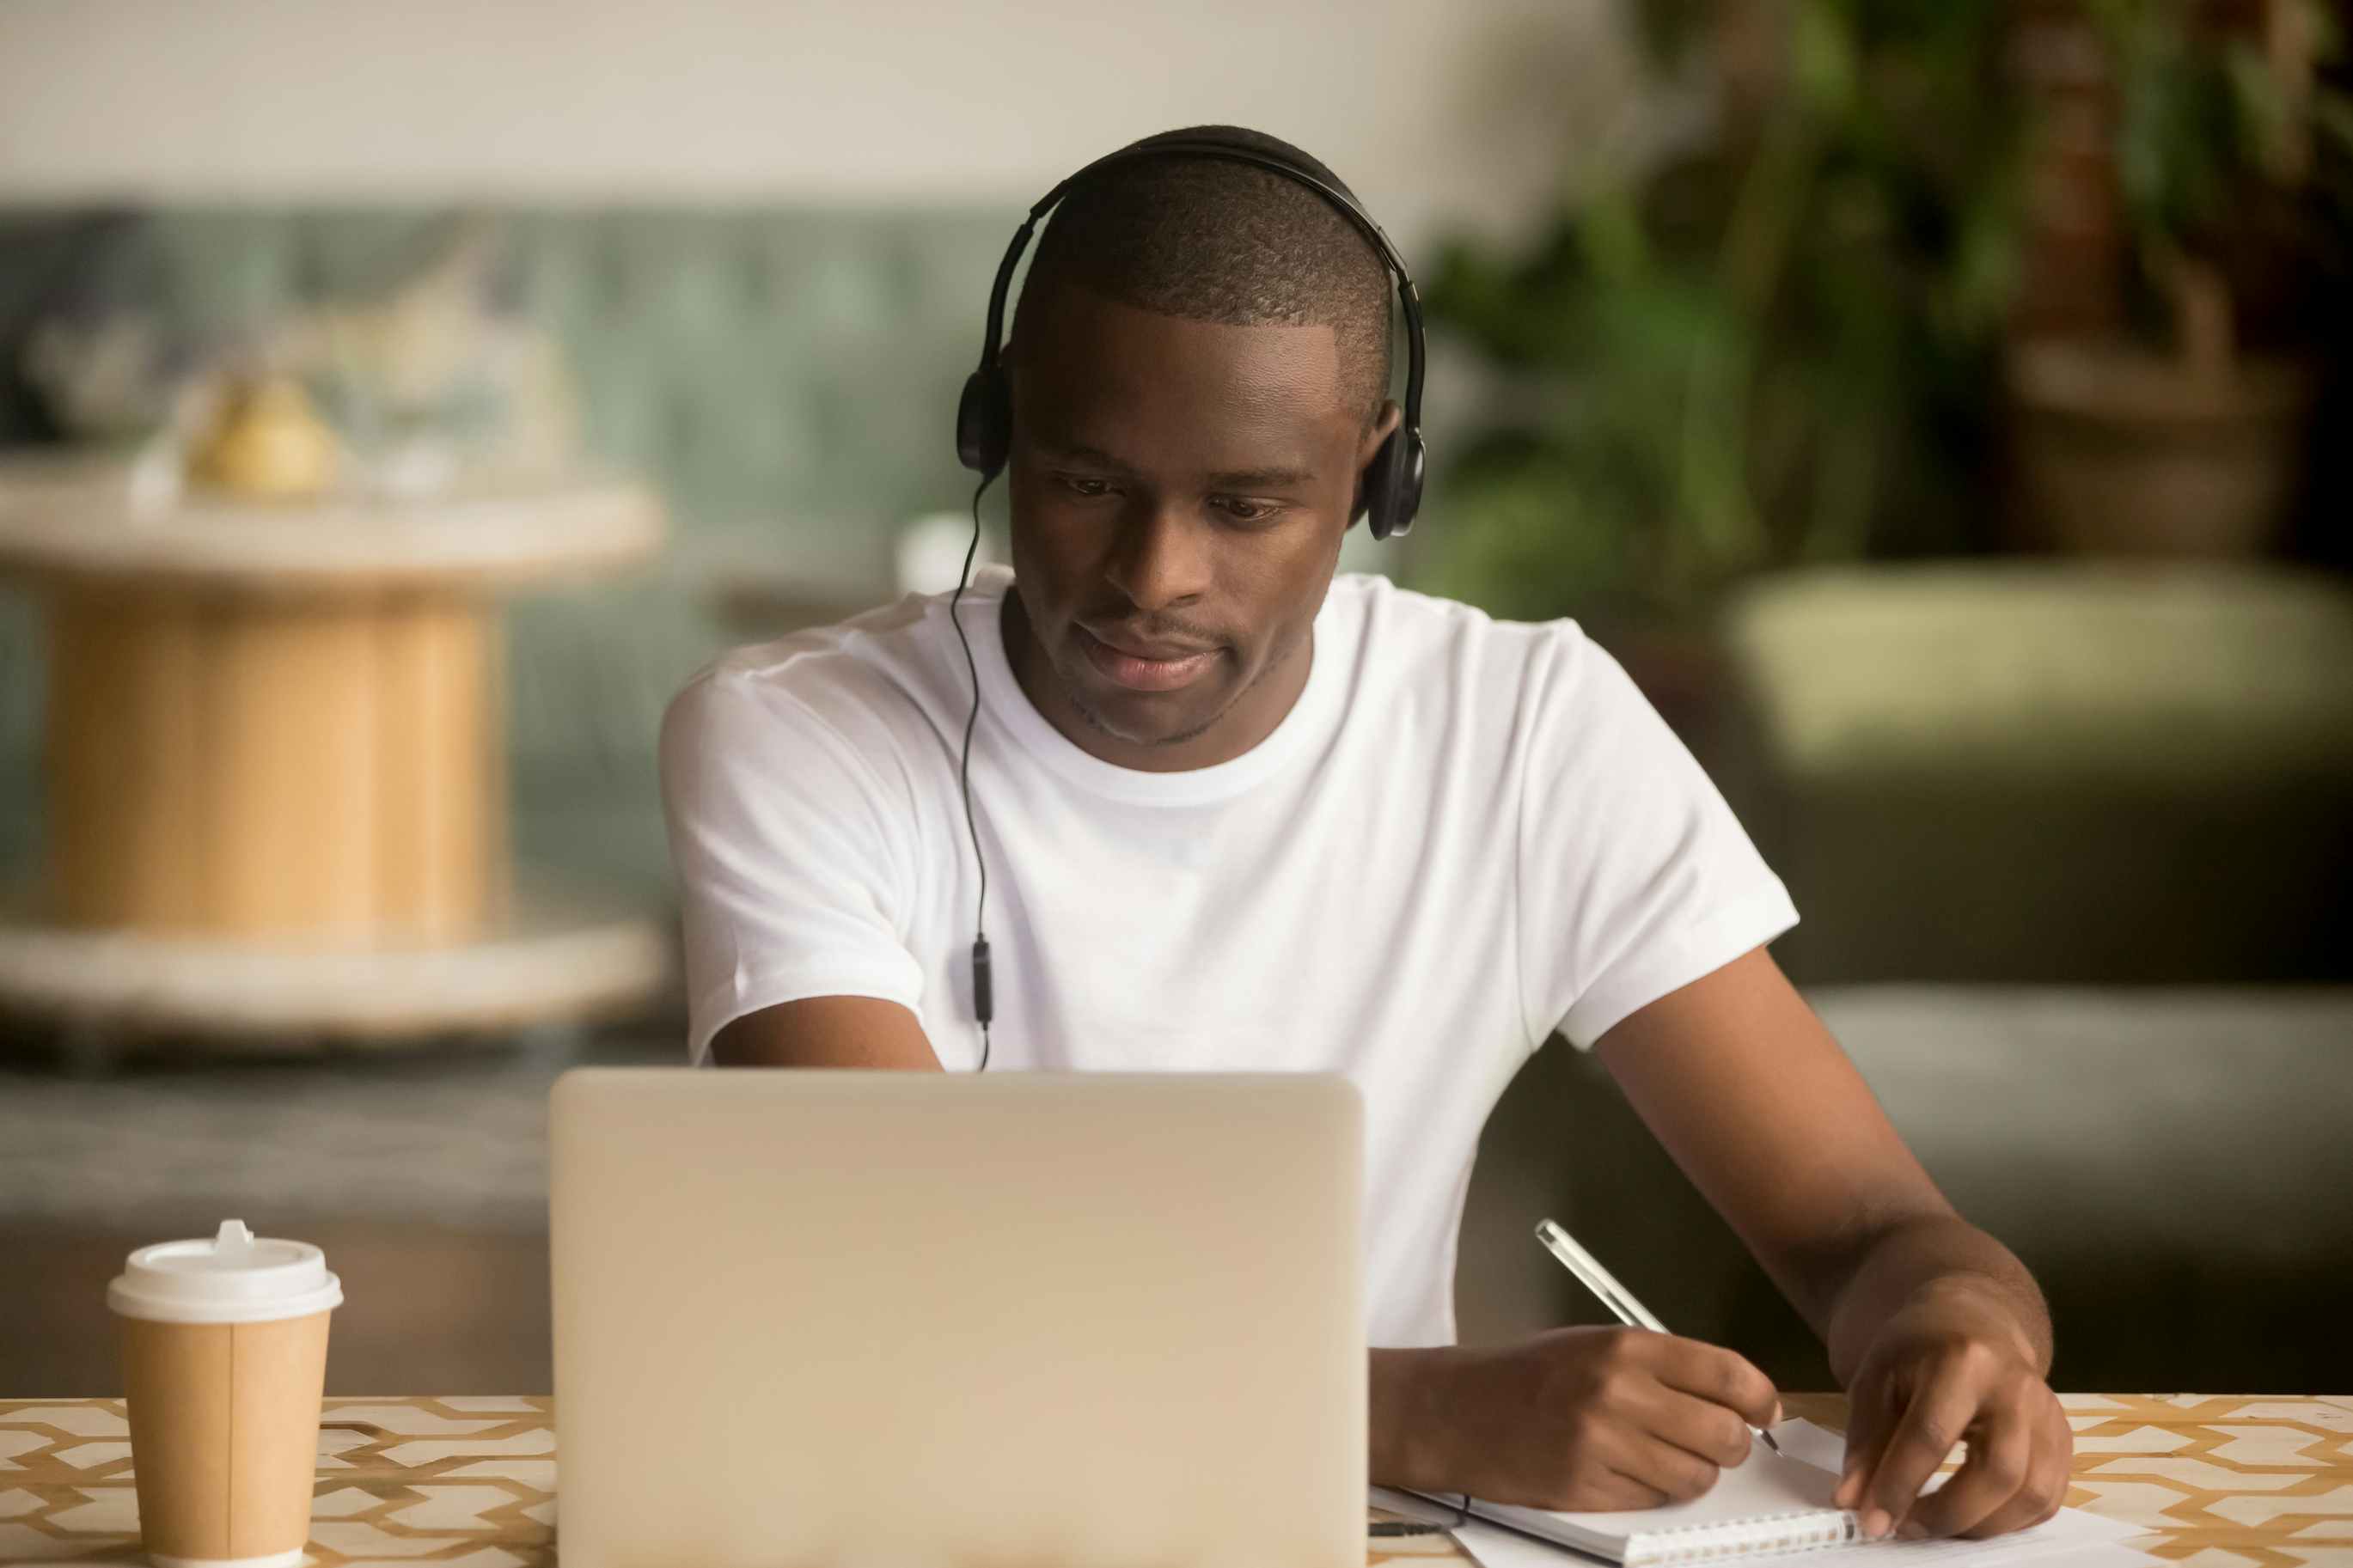 Man looking at laptop with headphones